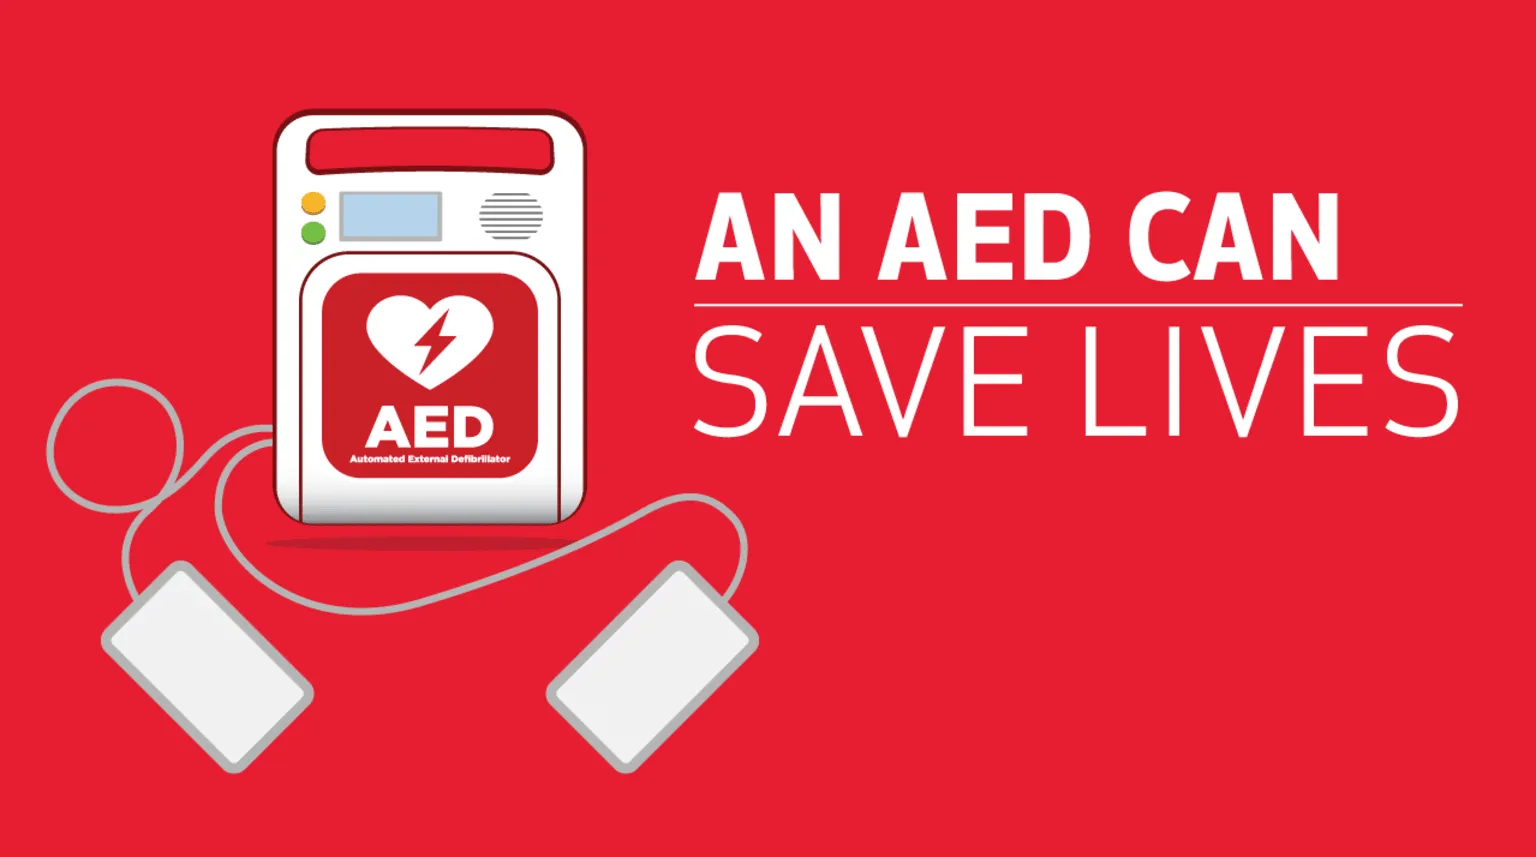 HOW TO SAVE A LIFE BY USING AN AED?